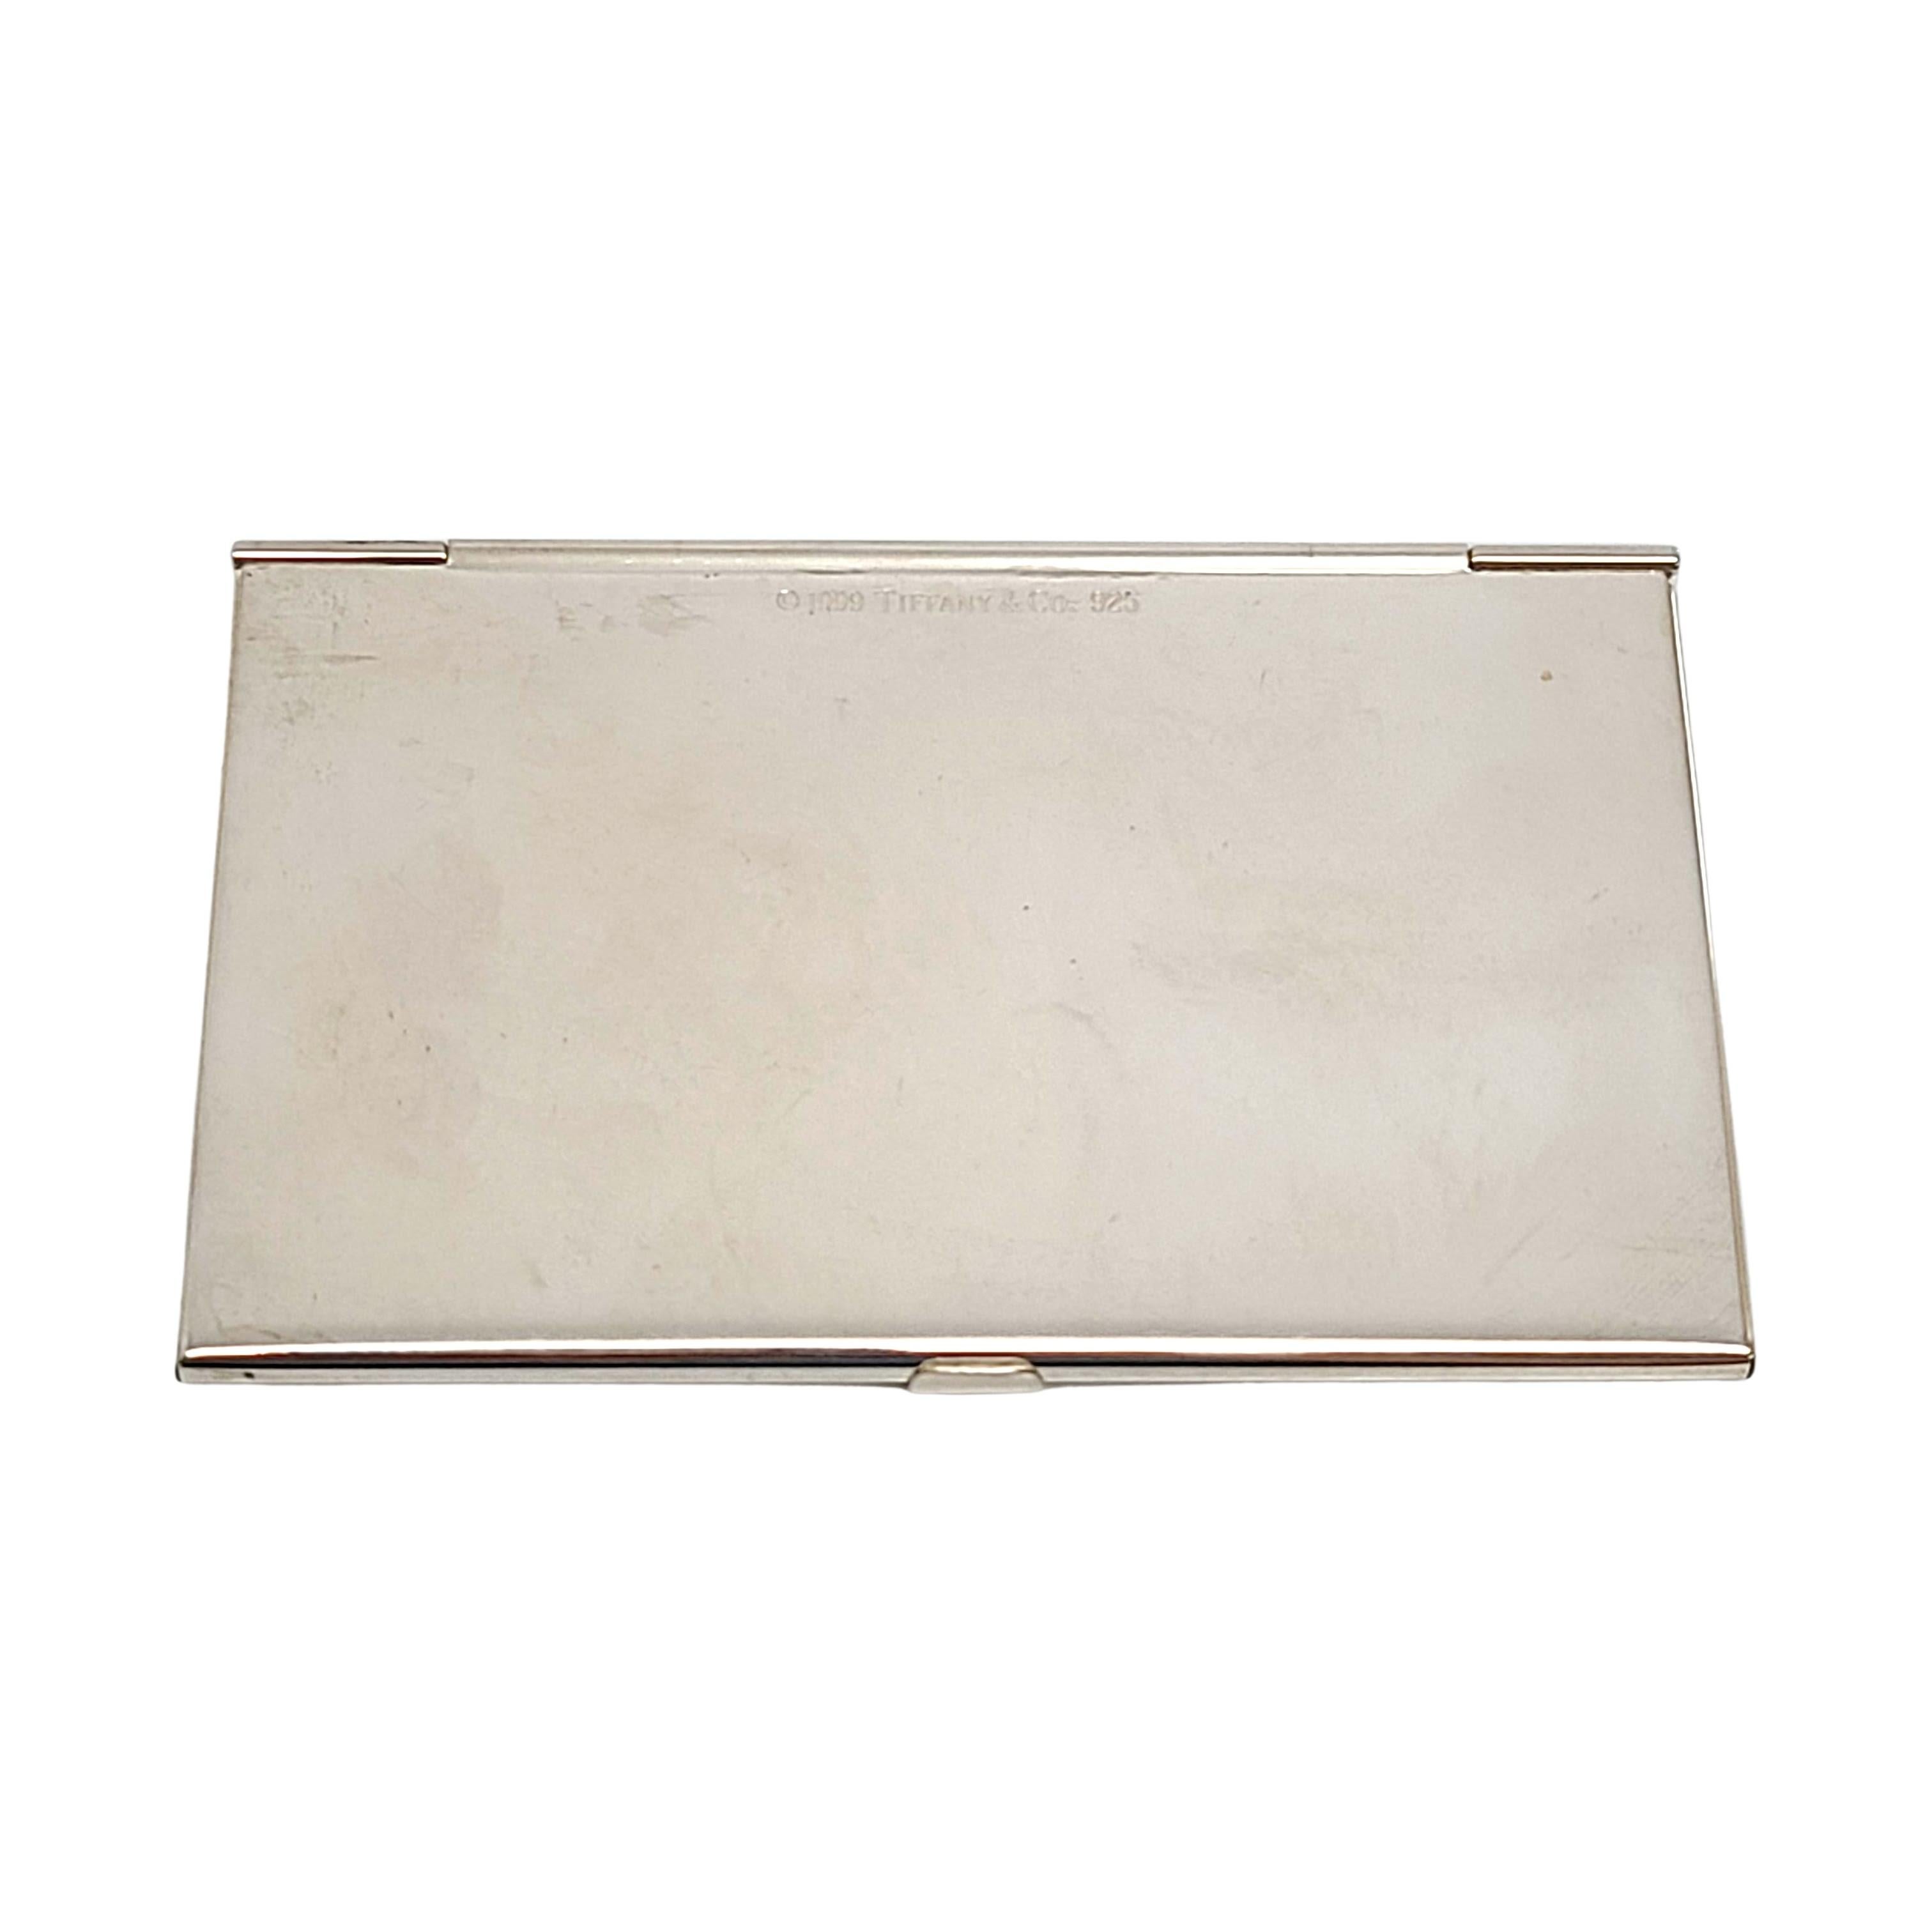 Sterling silver 1837 business card case by Tiffany & Co.

No monogram.

This simple and elegant piece features a smooth polished finish. Front cover features 925 in a triple diamond cartouche, T&CO 1837 in a frame. Can hold credit cards or business